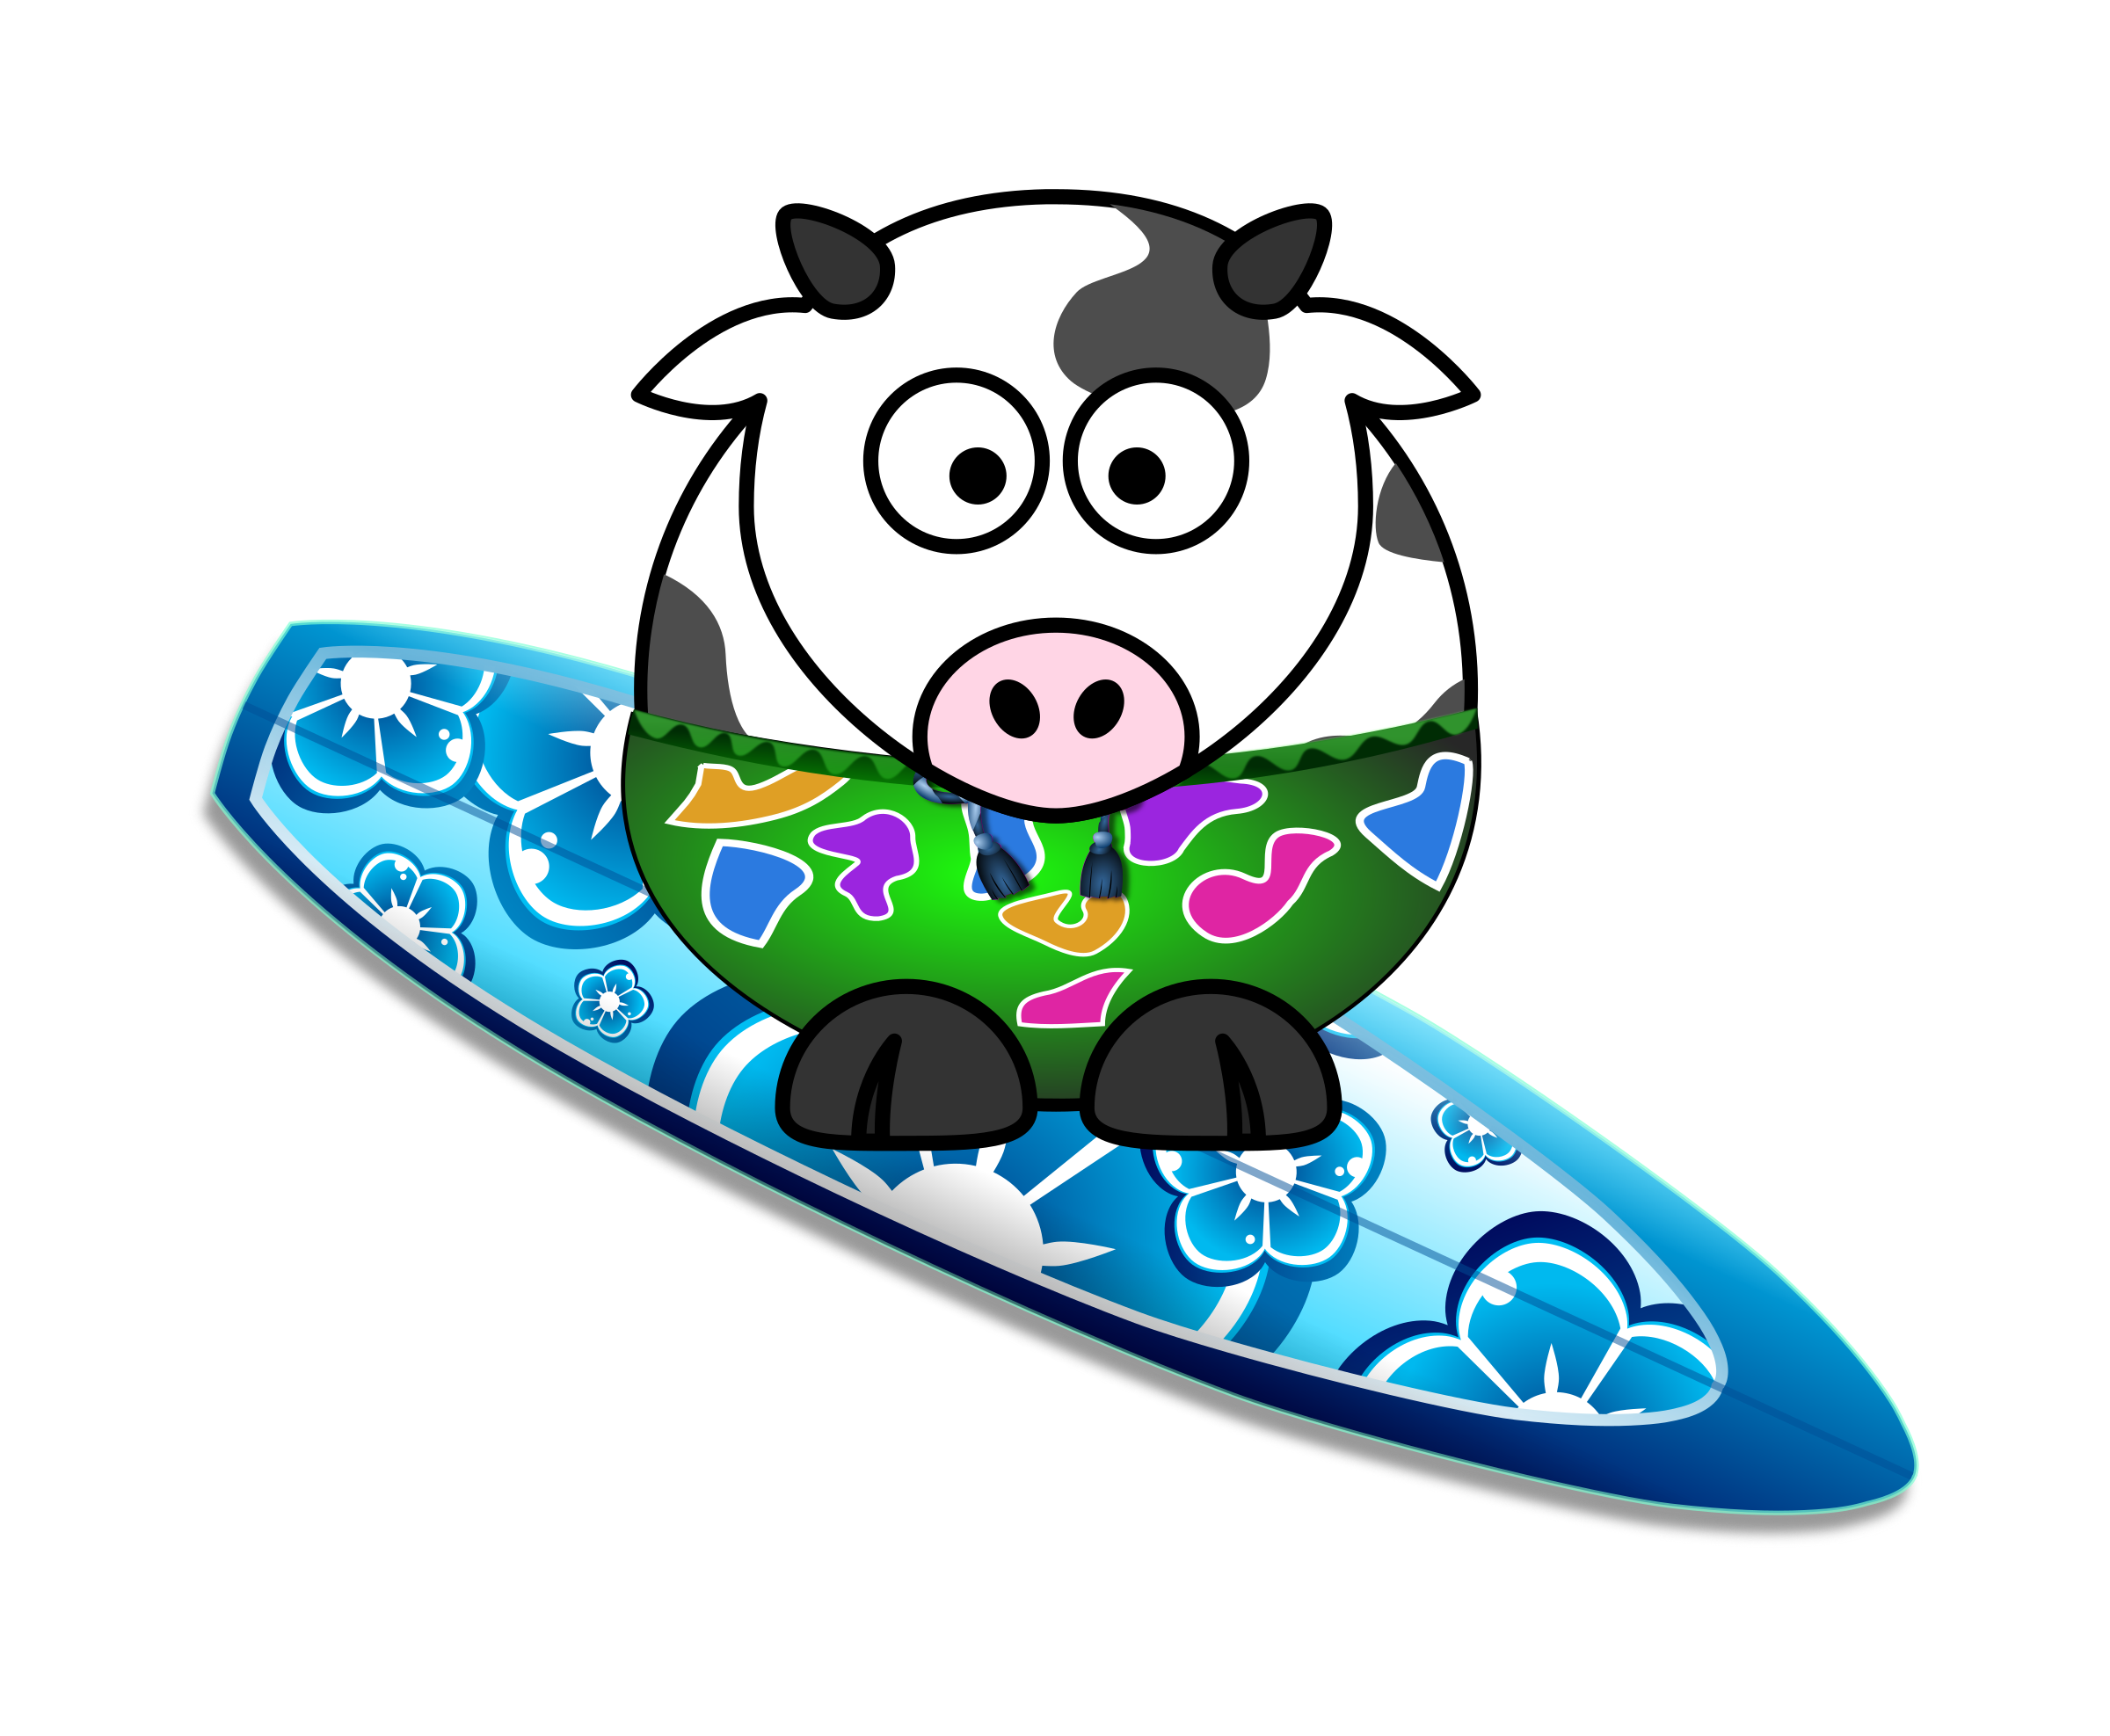 Waves clipart surfing. Surfer cow big image